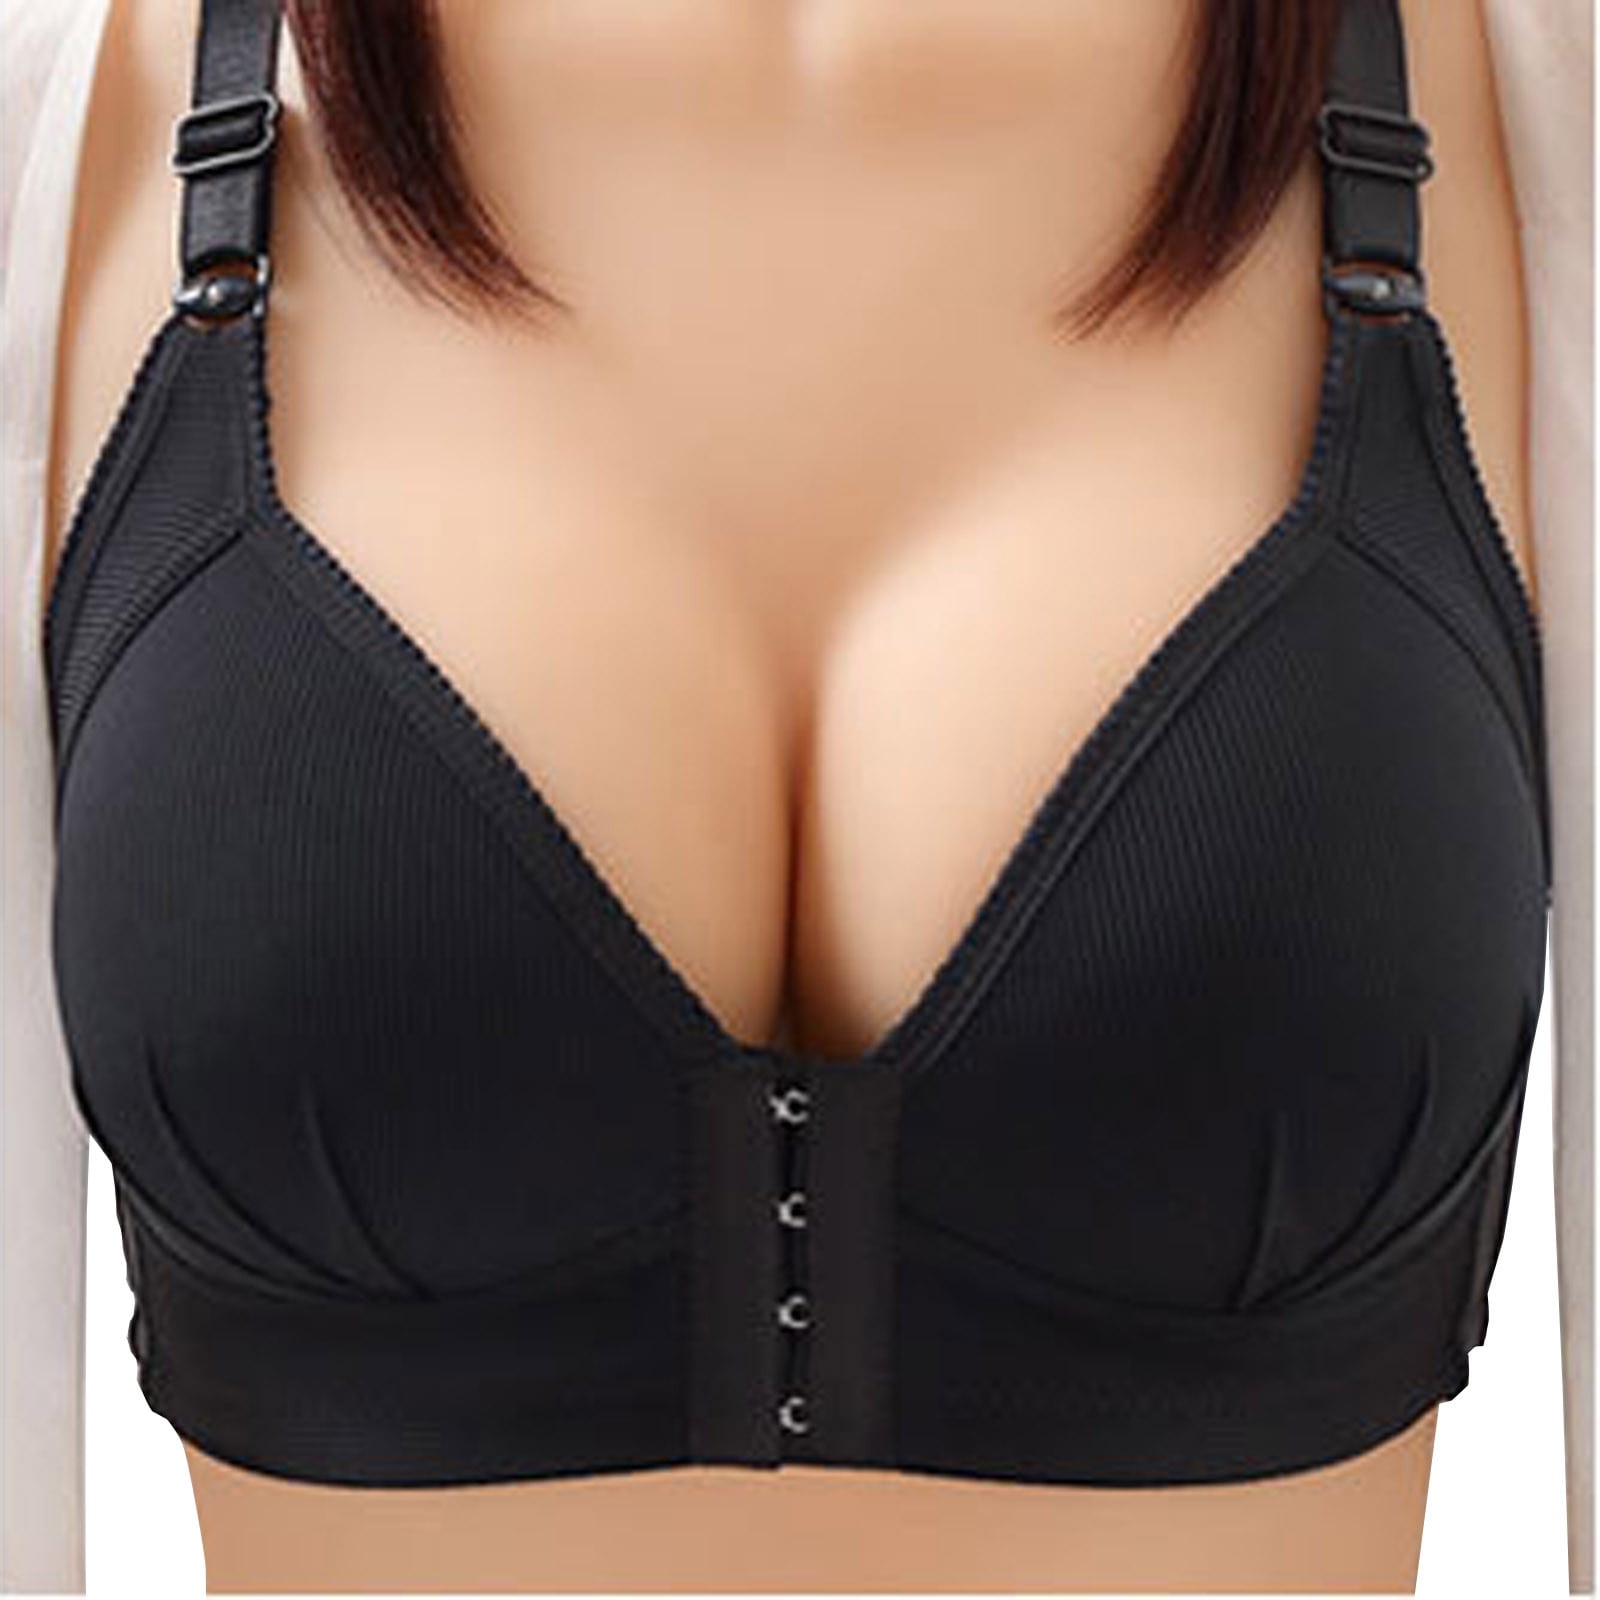 Dqueduo Women's Front Closure Wireless Bra, Perfect Plus Size Stretch  Push-Up Bra, Convertible Bras for Women with Adjustable Shoulder Straps on  Clearance 